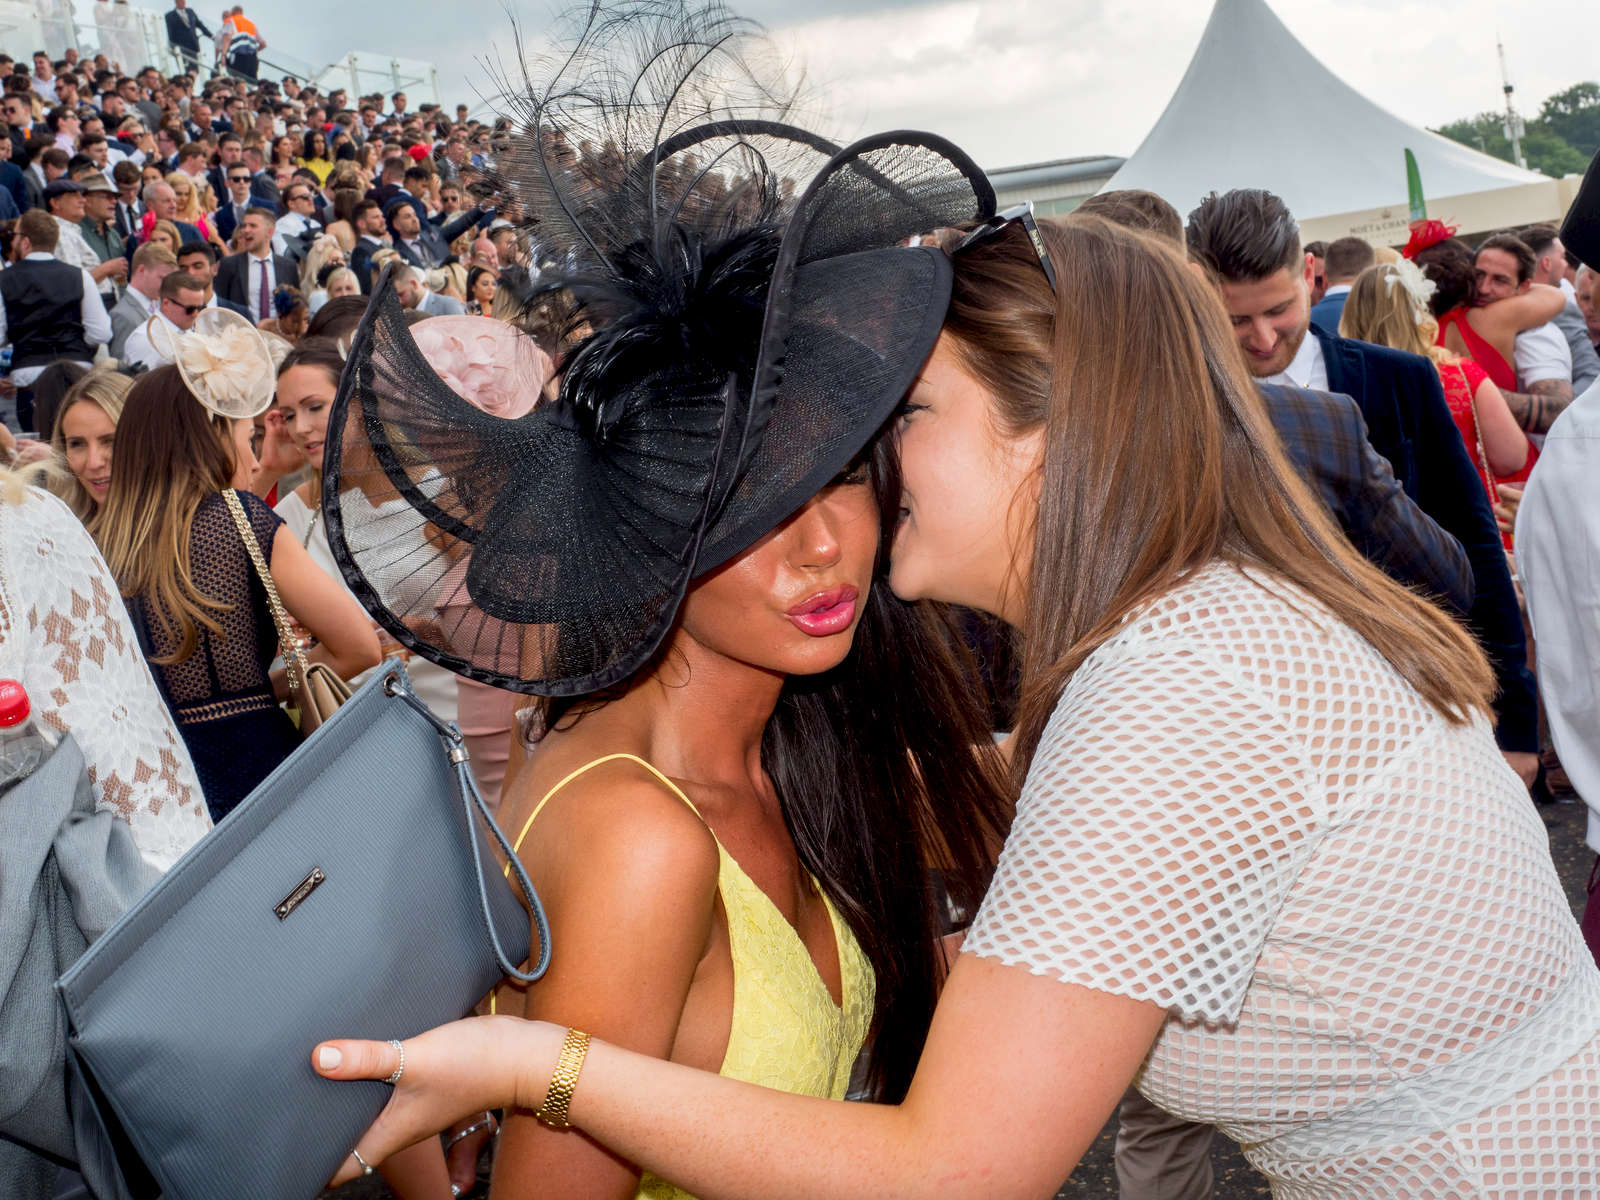 Two women greet each other among the crowd on Ladies' Day at Epsom.Ladies' Day is traditionally held on the first Friday of June, a multitude of ladies and gents head to Epsom Downs Racecourse to experience a day full of high octane racing, music, glamour and fashion.